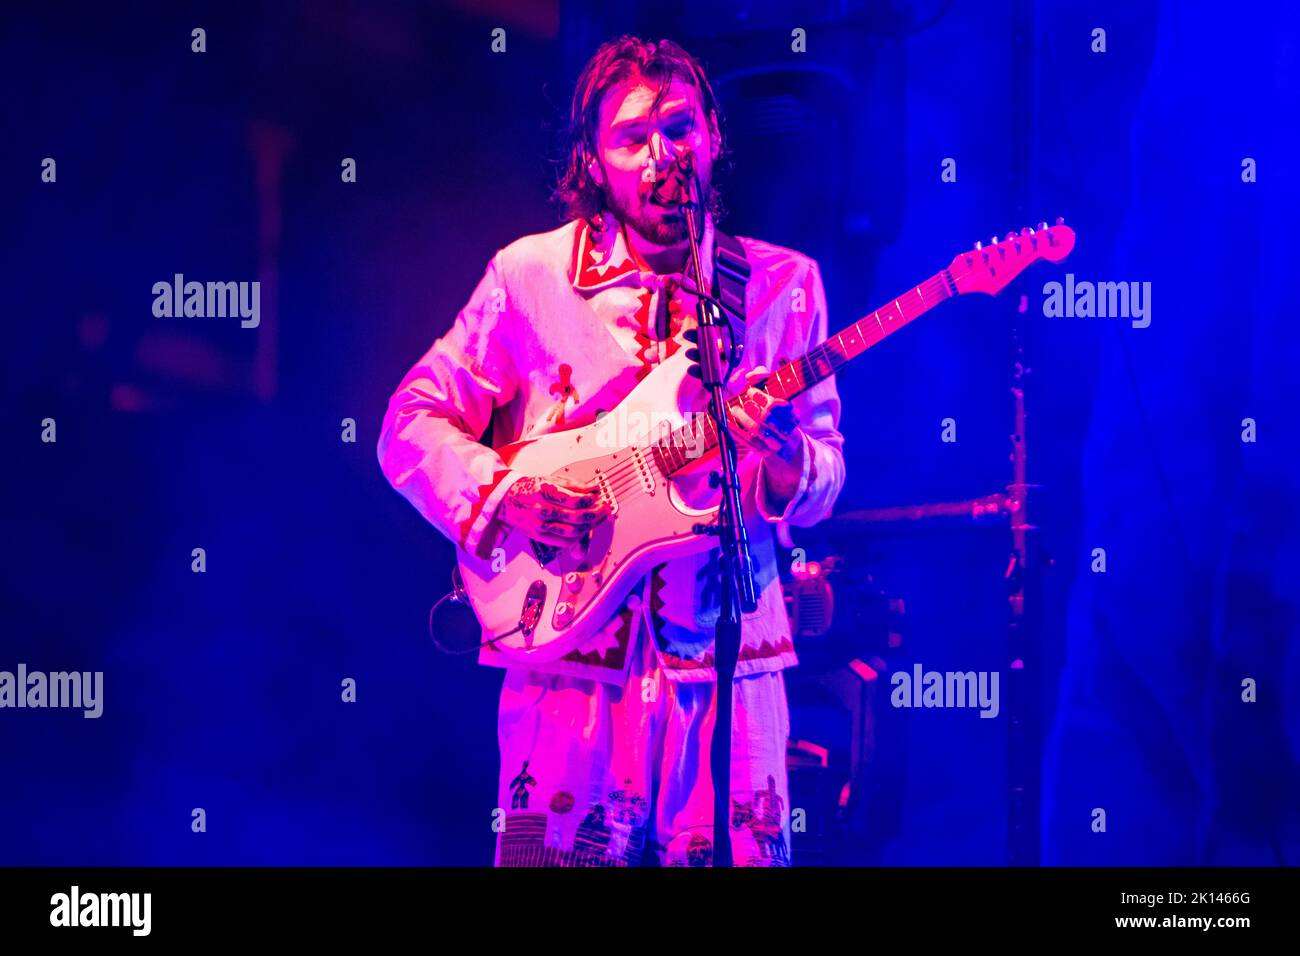 Milan Italy. 14 September 2022. The Scottish rock band BIFFY CLYRO performs live on stage at Carroponte. Stock Photo